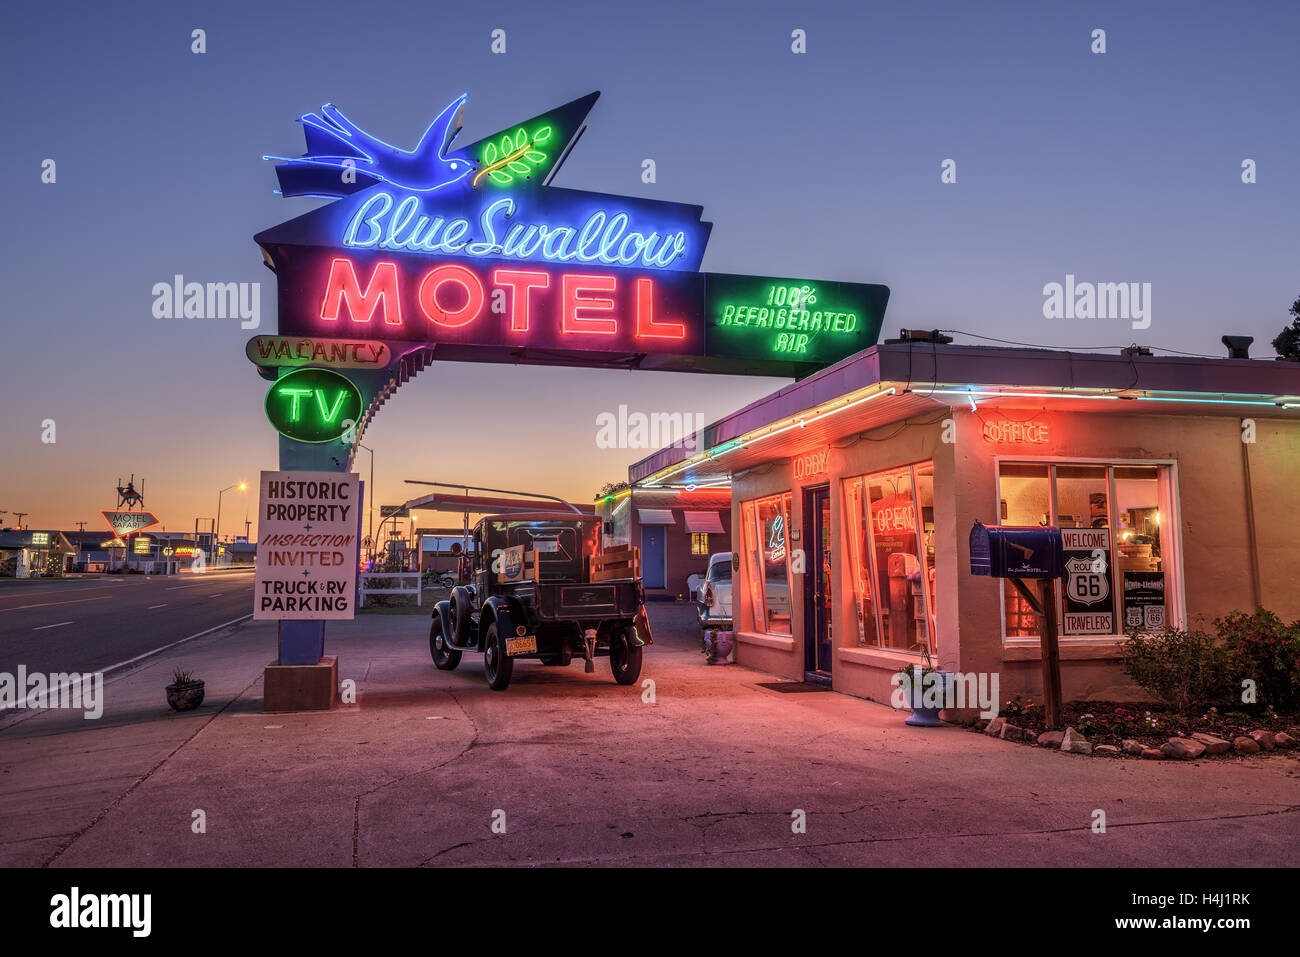 Historic Blue Swallow Motel with a vintage car parked in front of it during the blue hour Stock Photo